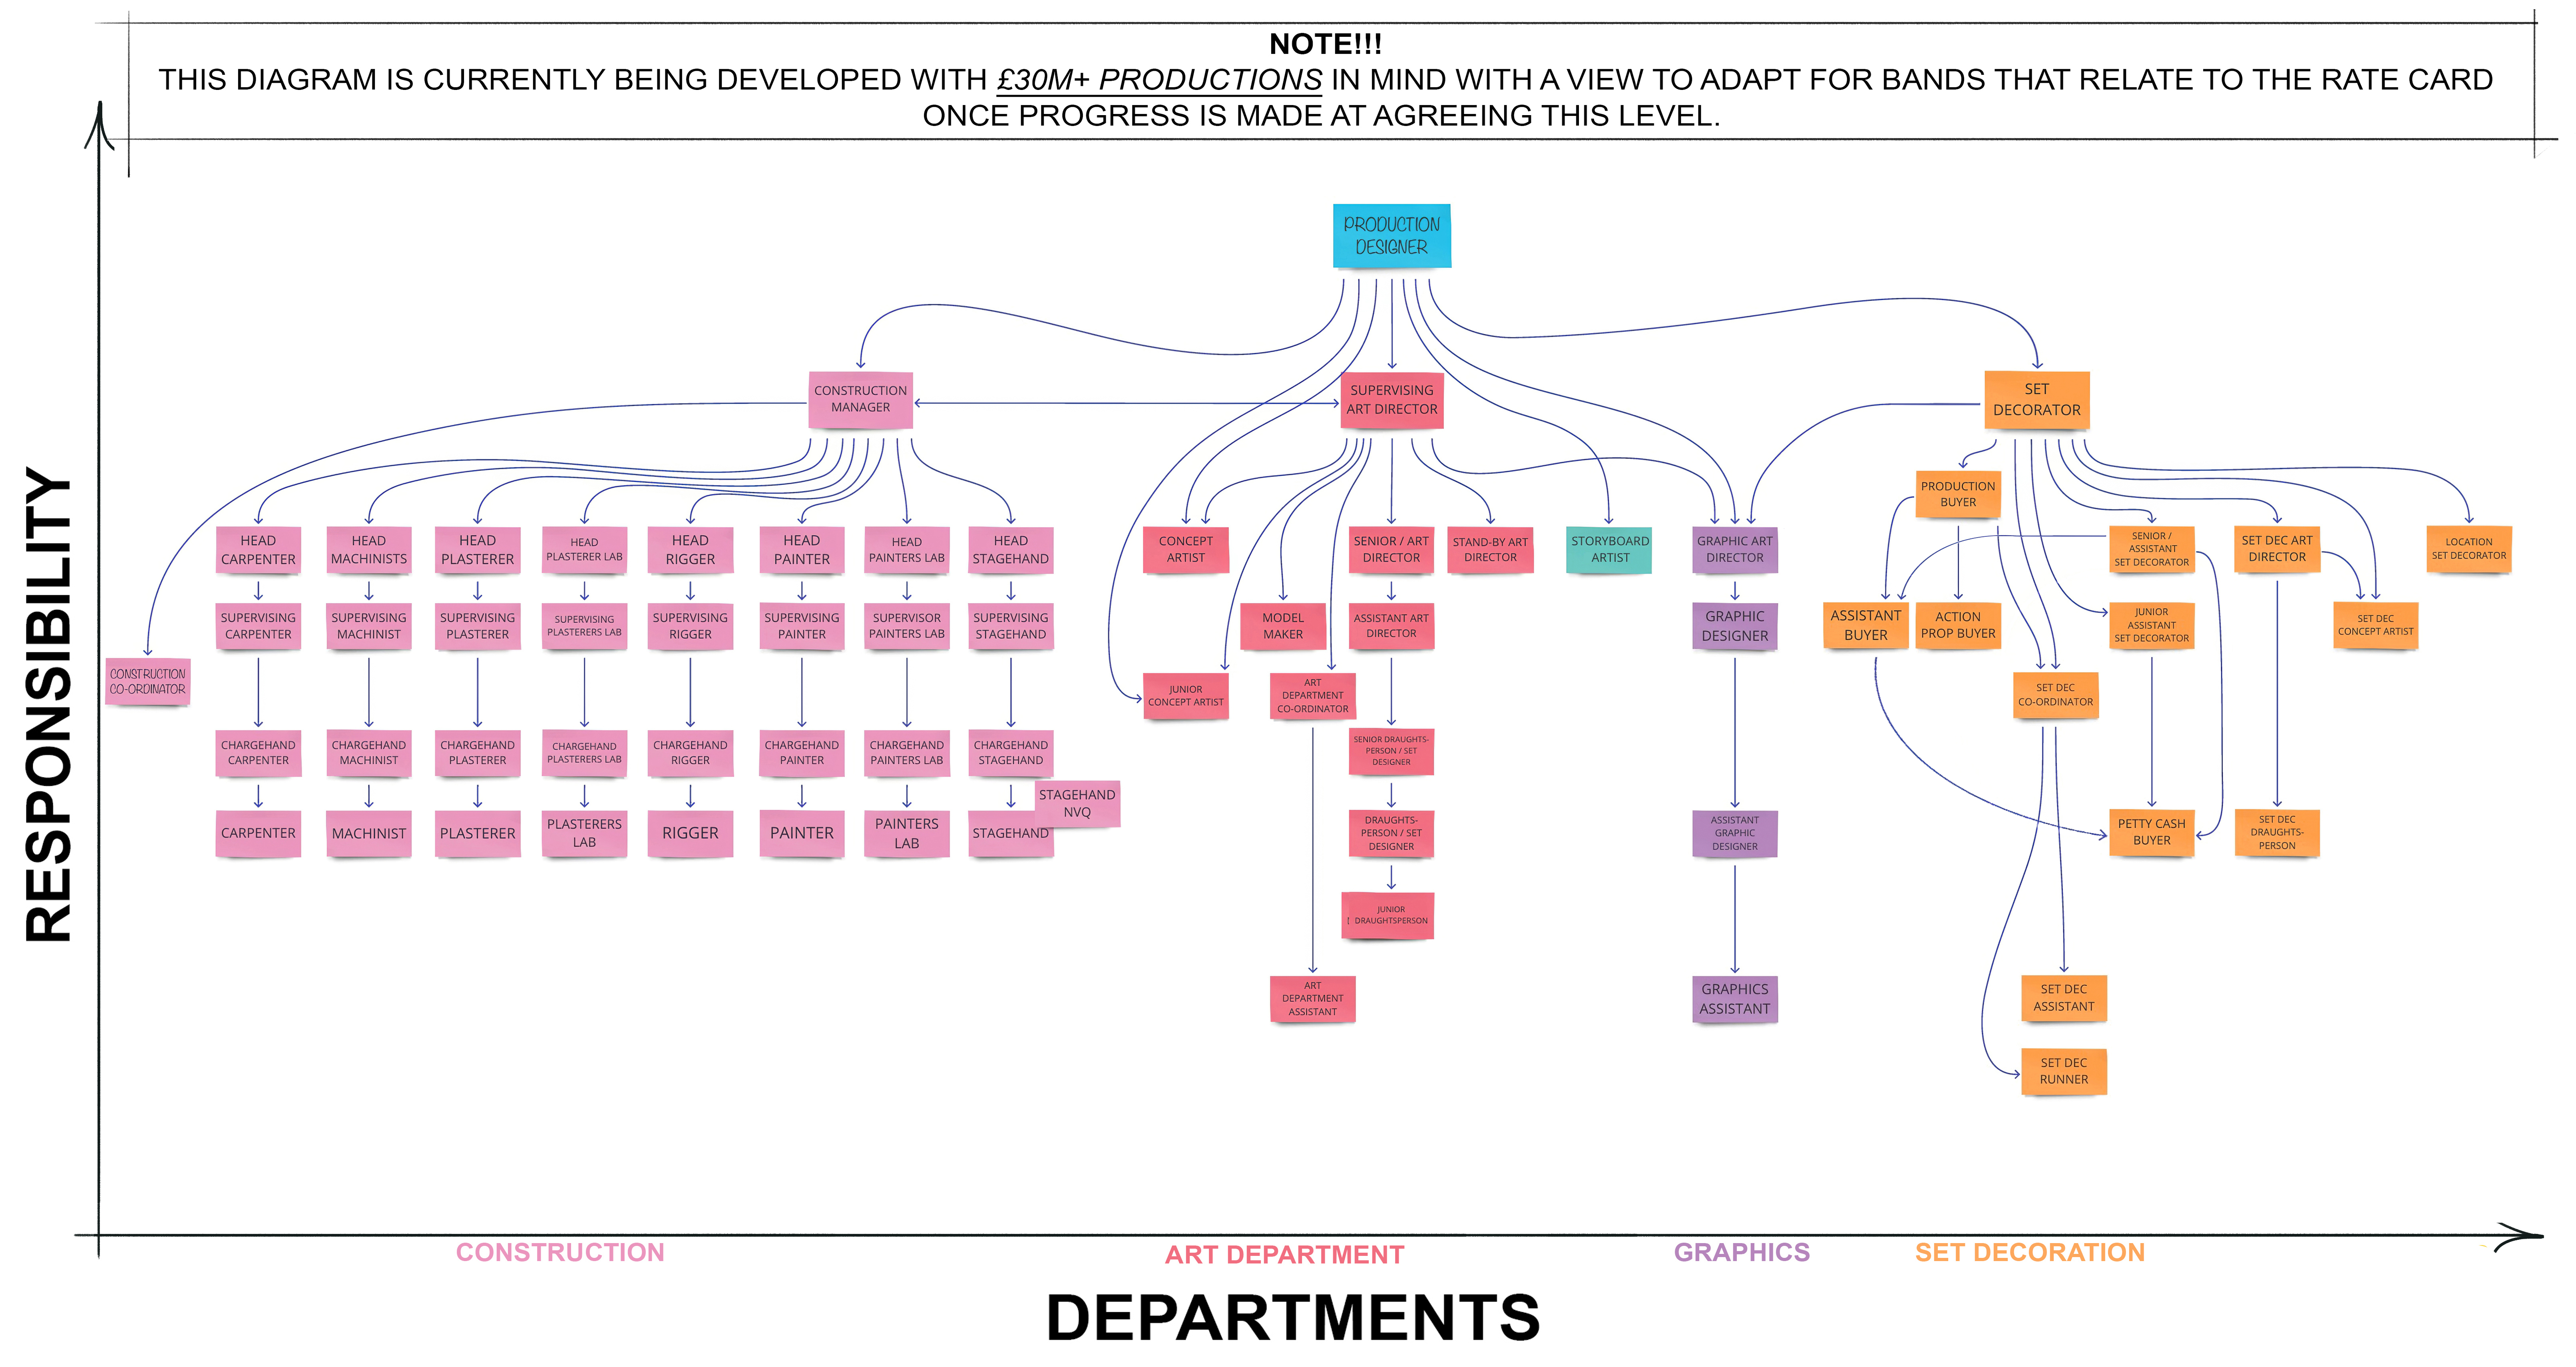 A responsability diagram showing intended parity of rates across the departments